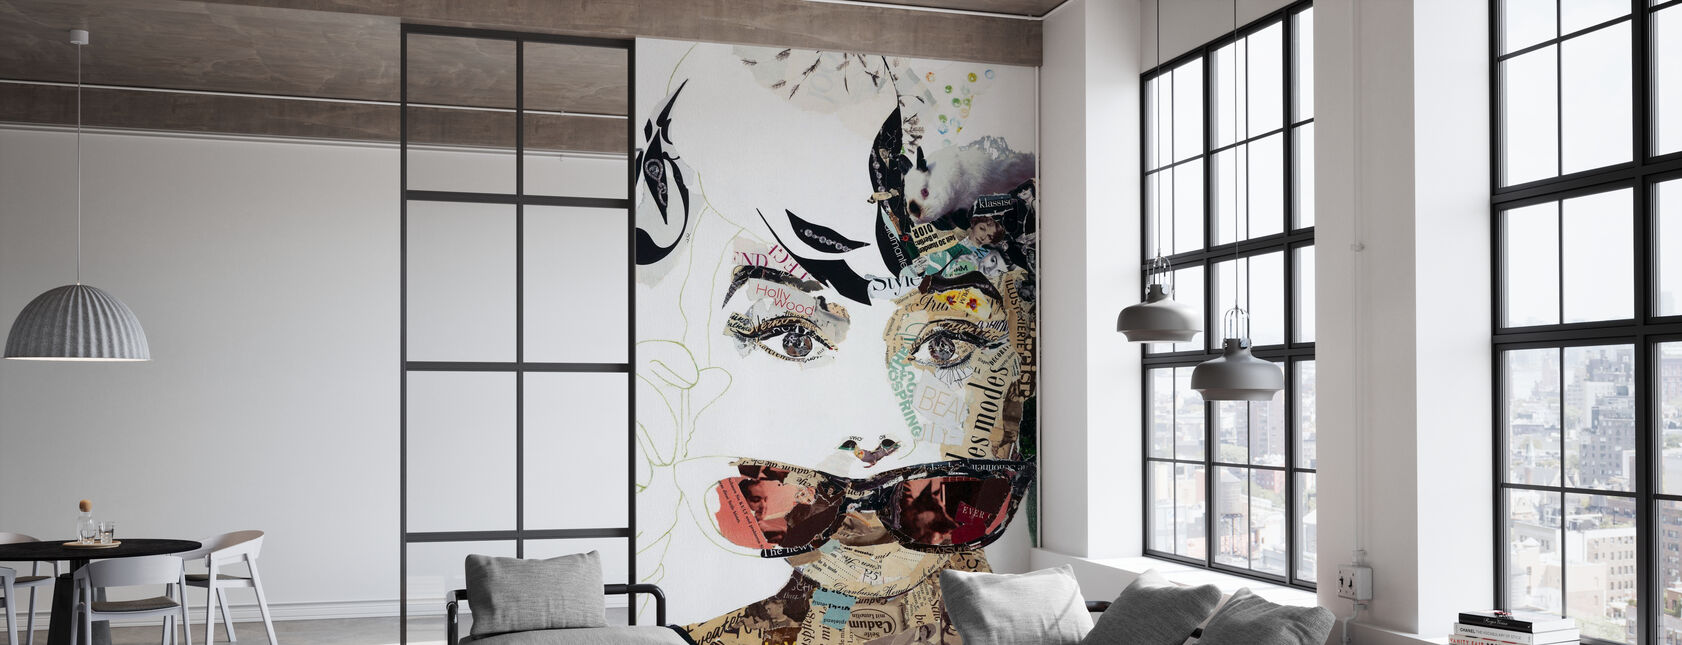 Breakfast at Tiffany's - Collage - Wallpaper - Office